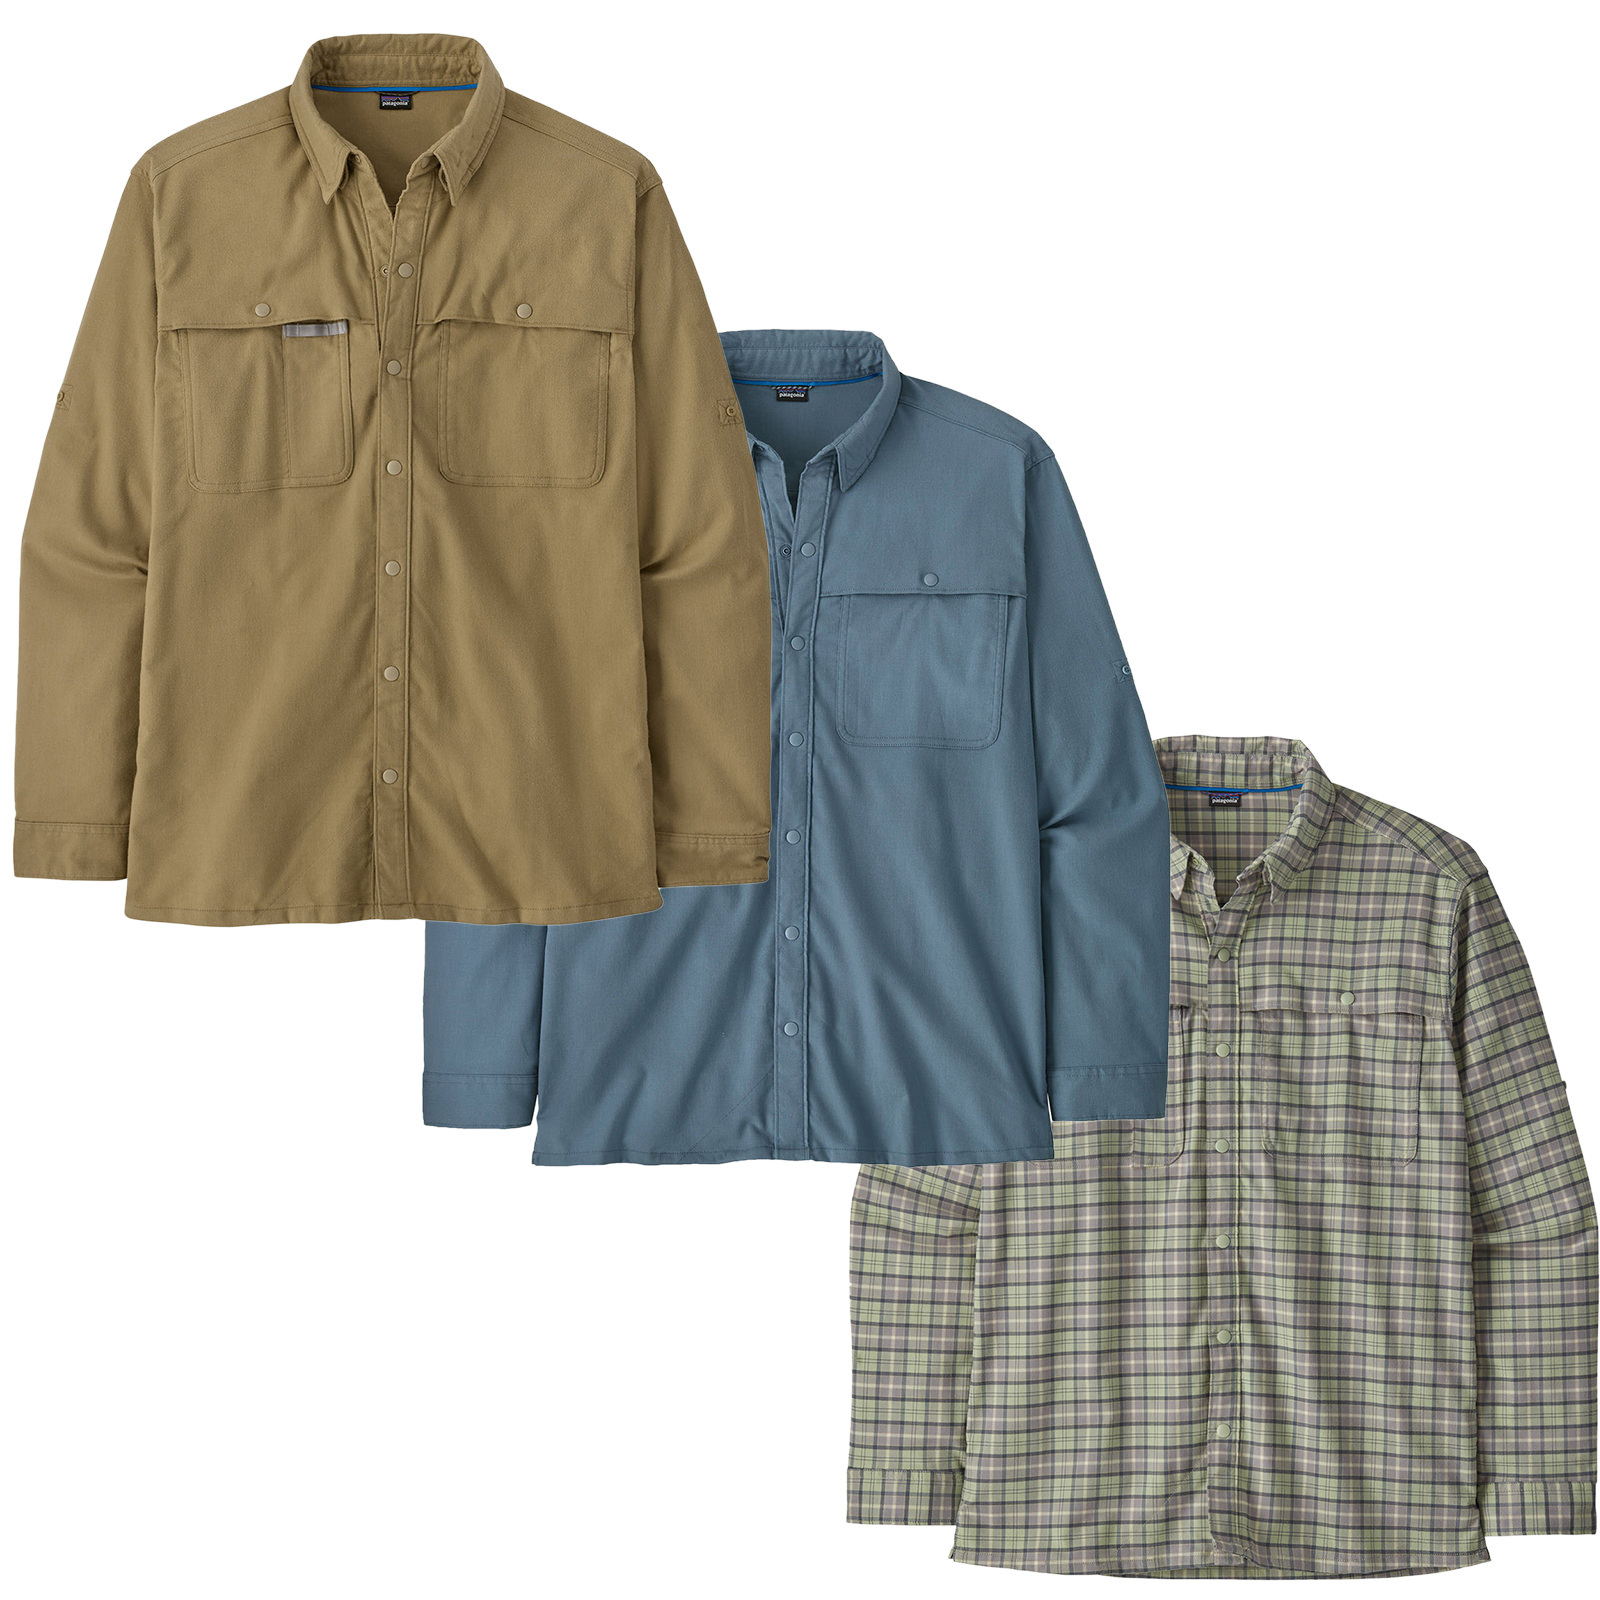 Women's Early Rise Stretch Shirt - Patagonia Elements